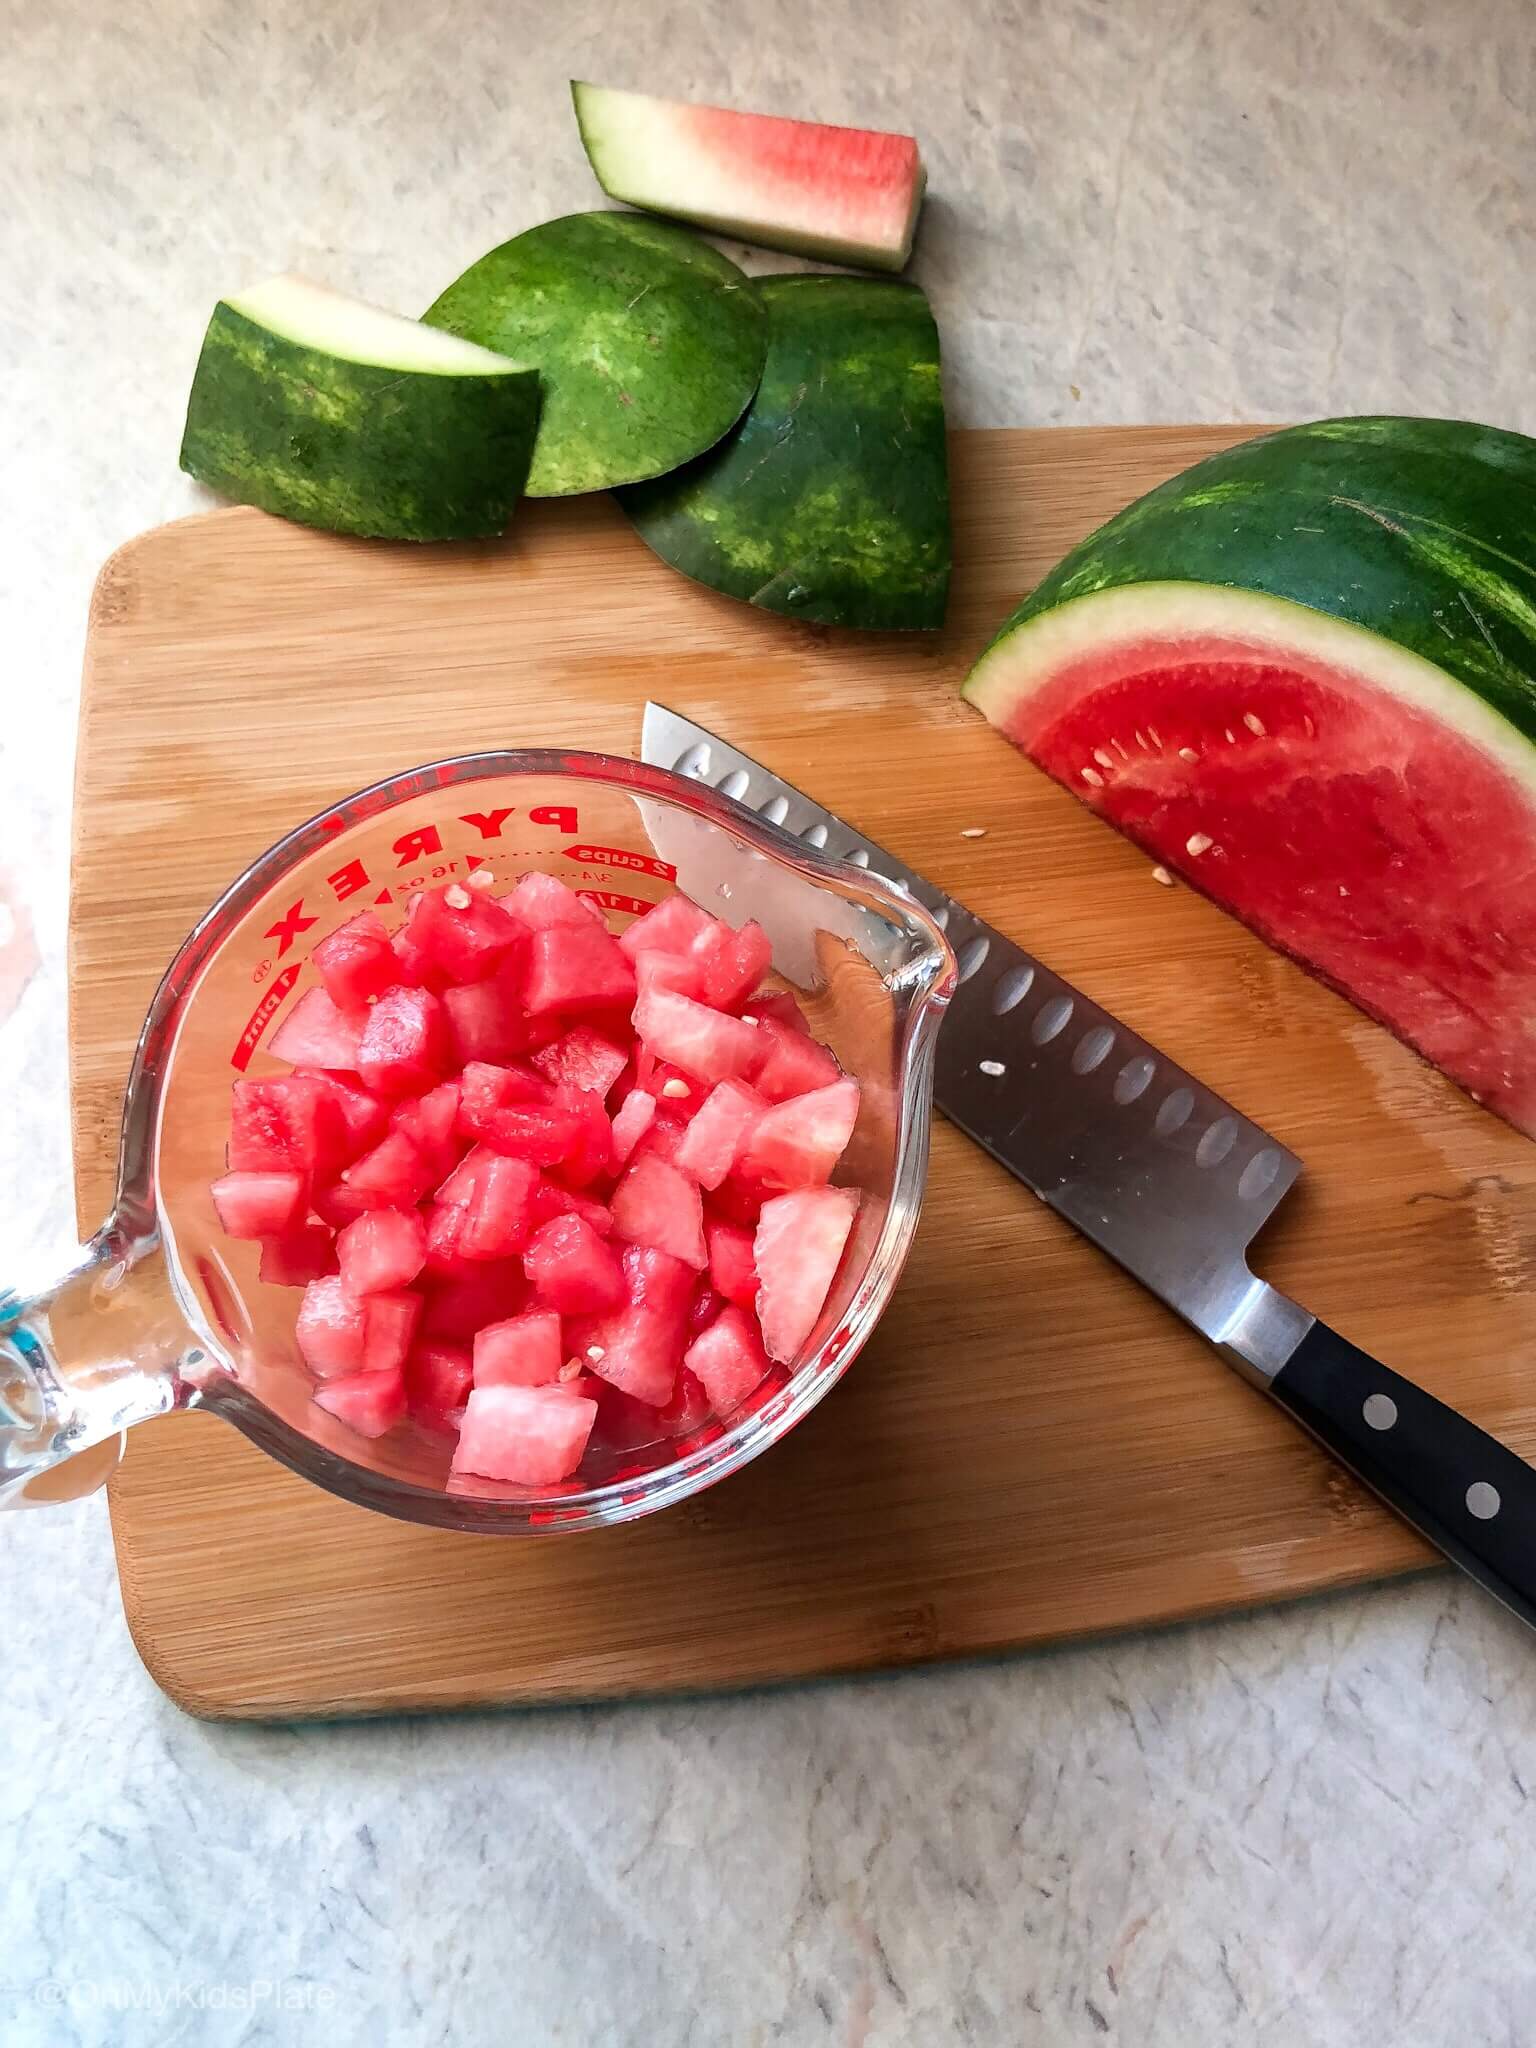 Watermelon diced in a measuring cup next to a knife and a piece of watermelon on a cutting board.